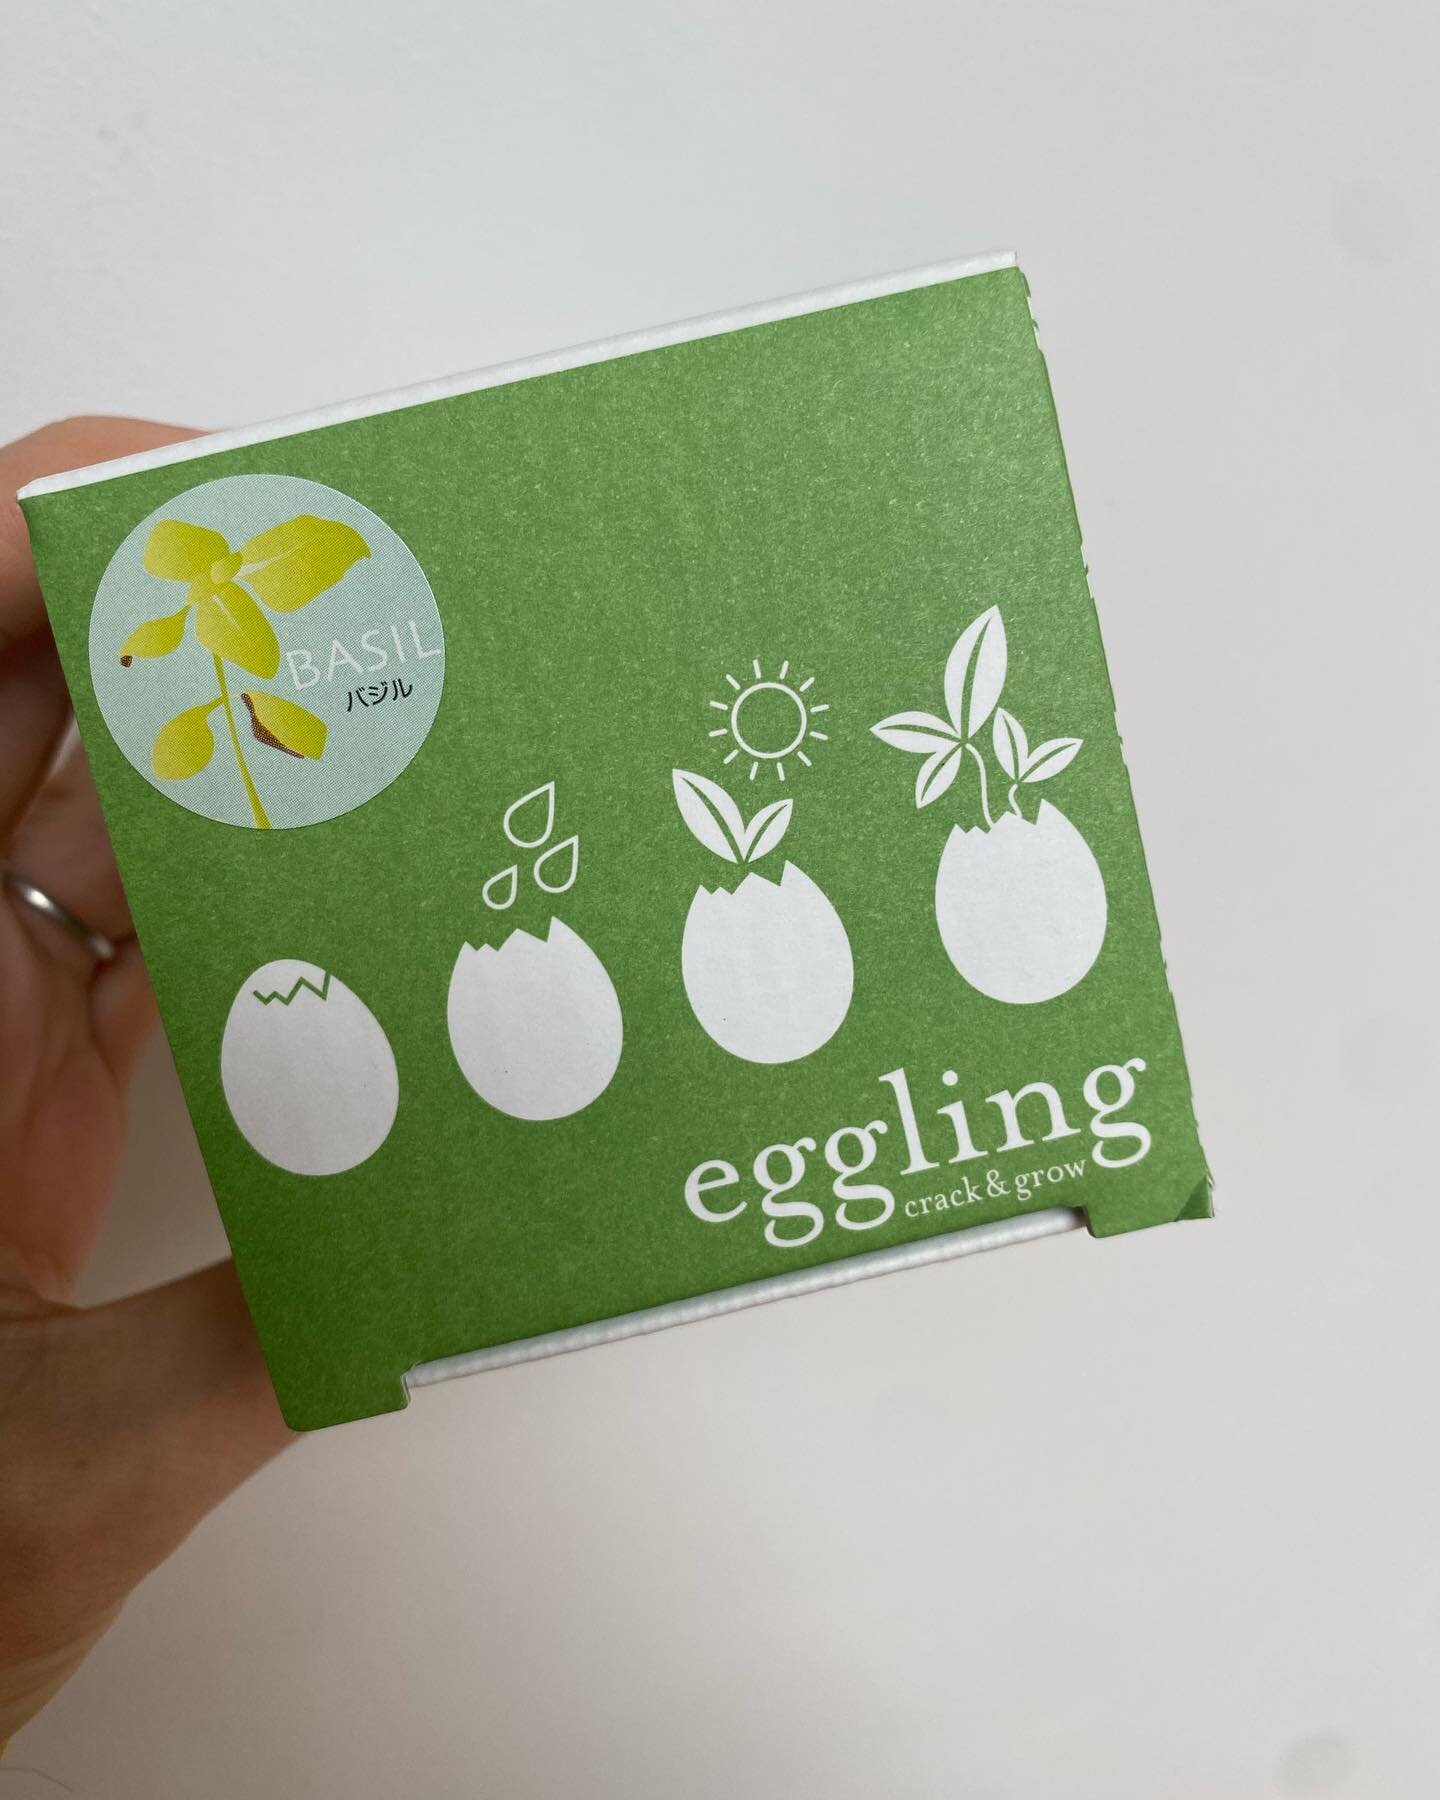 Instead of chocolate egg why not get an egg you can grow a plant in this Easter! 

Crack the top open and pour in water. That&rsquo;s all you need to do. Seeds and soil are already inside the egg 🥚